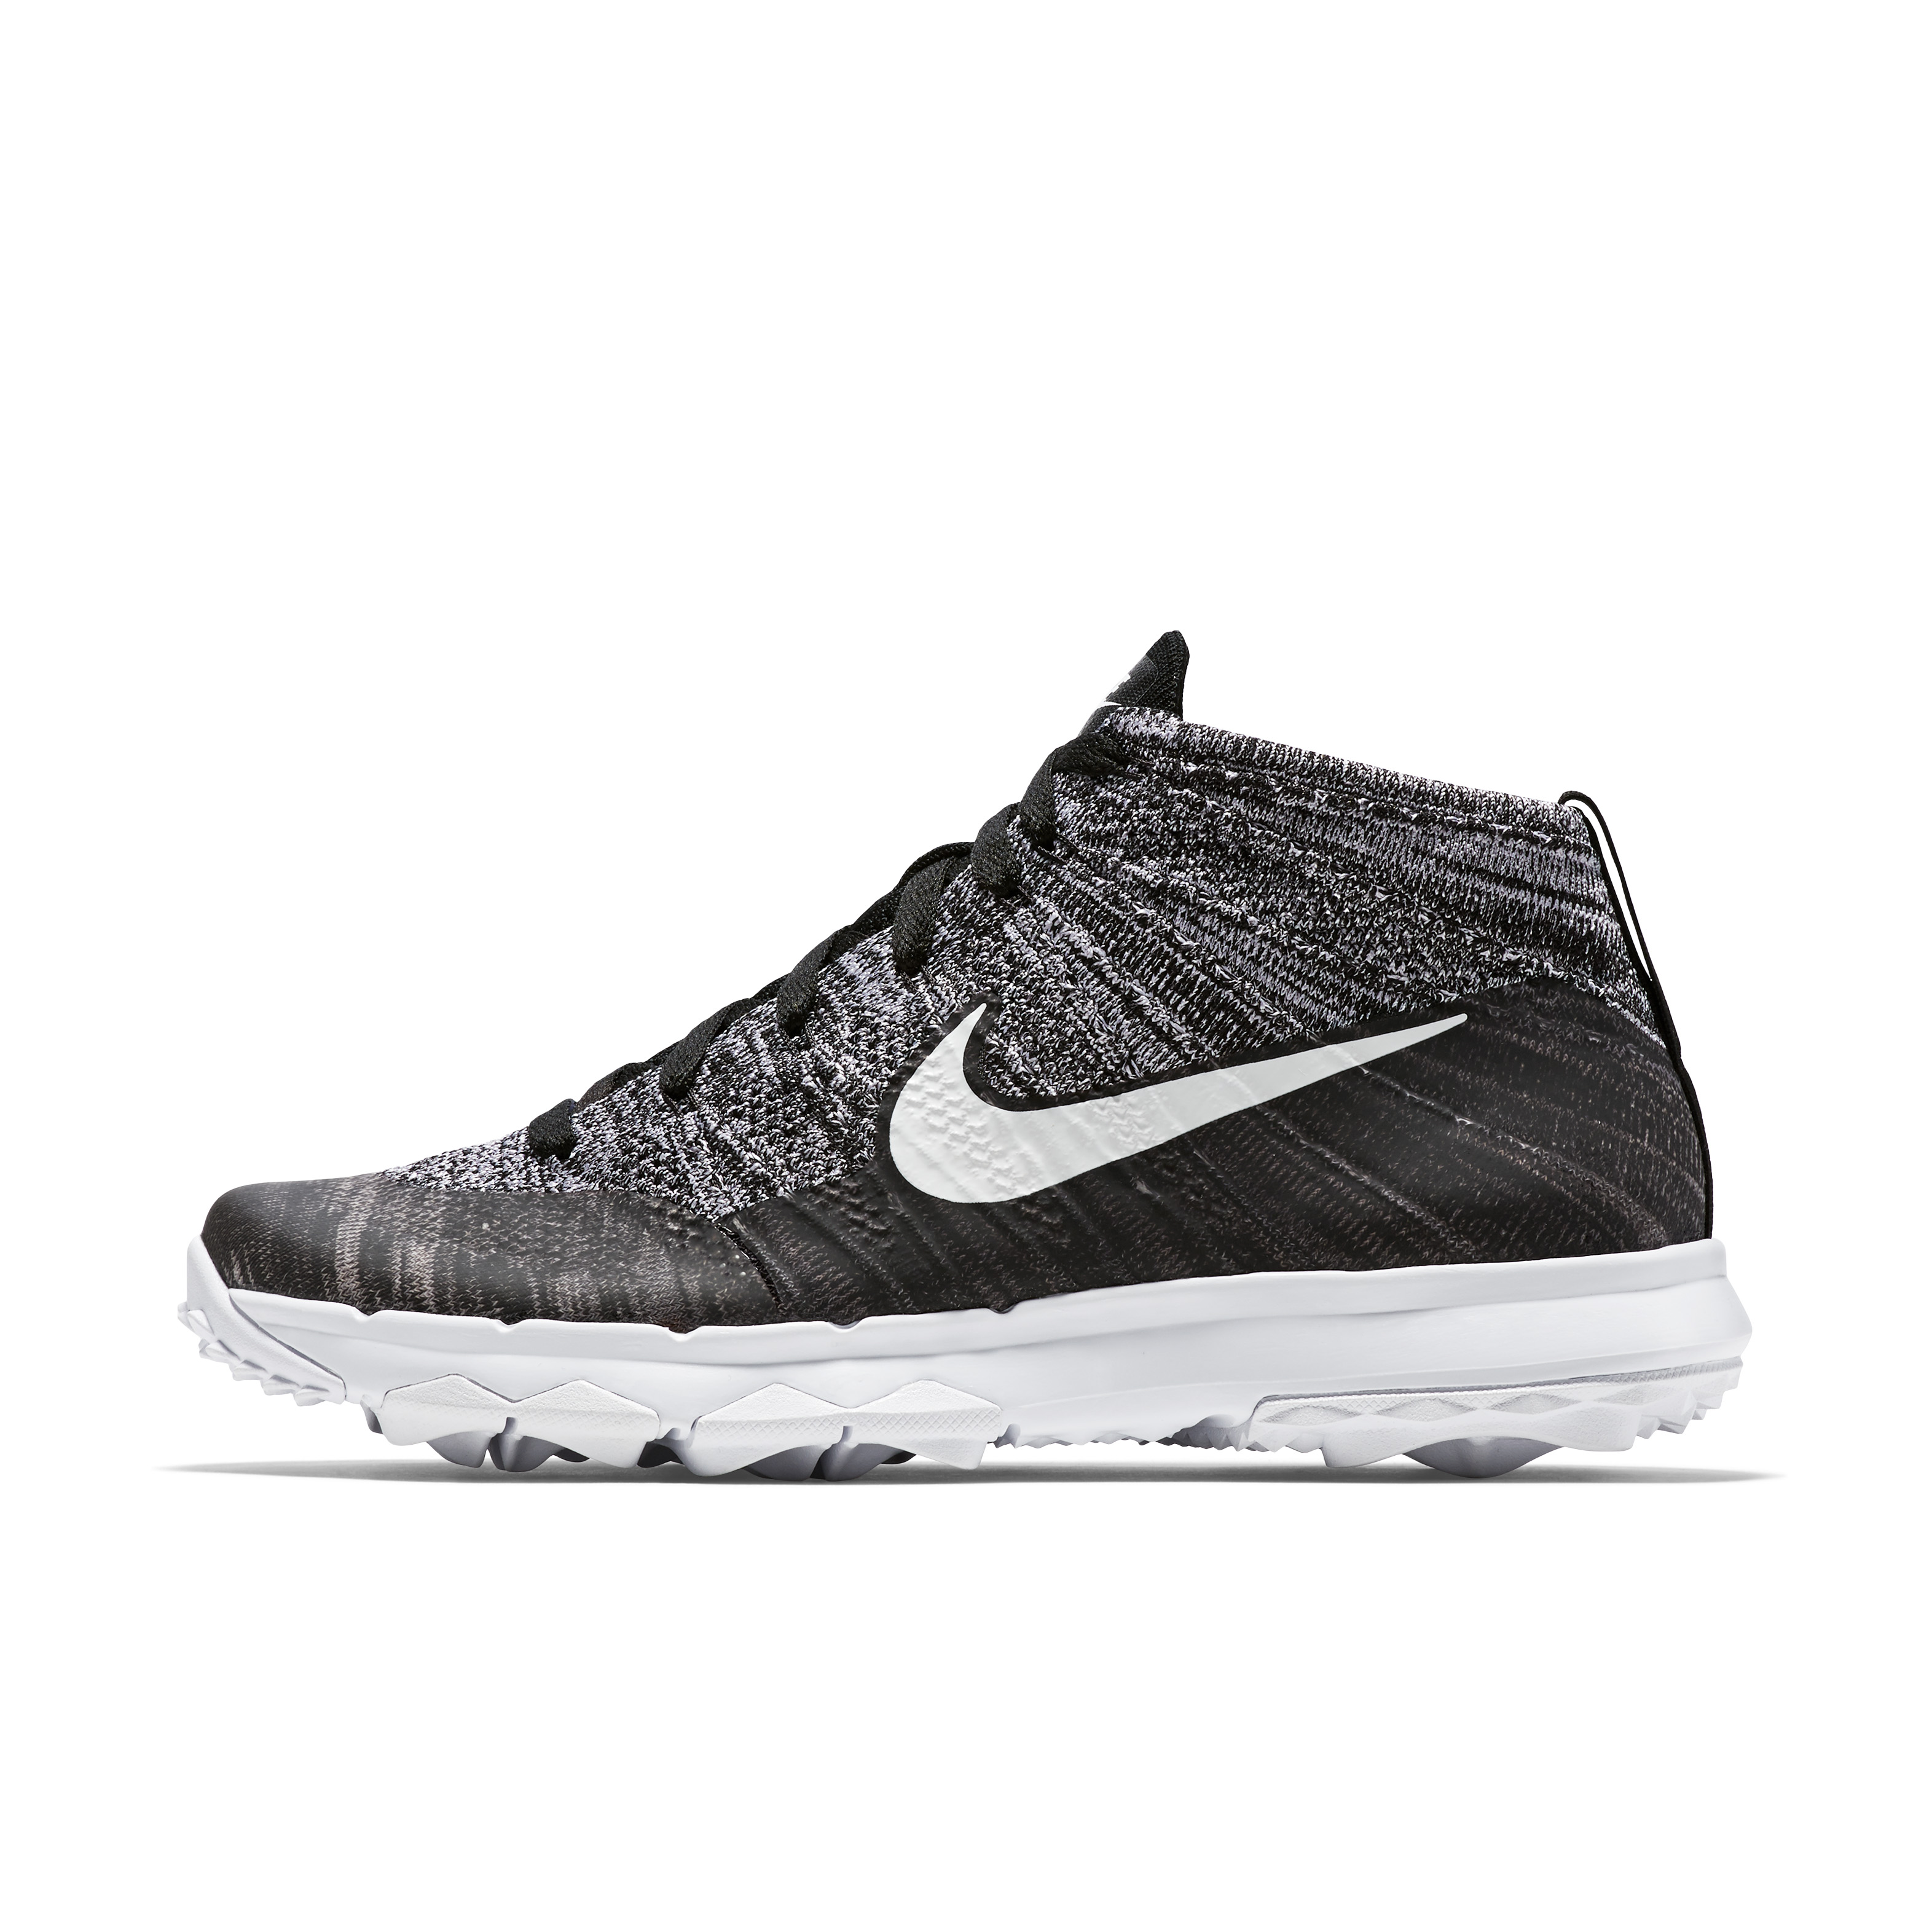 Nike releases its Flyknit Chukka to golf | This is the Loop | Golf Digest